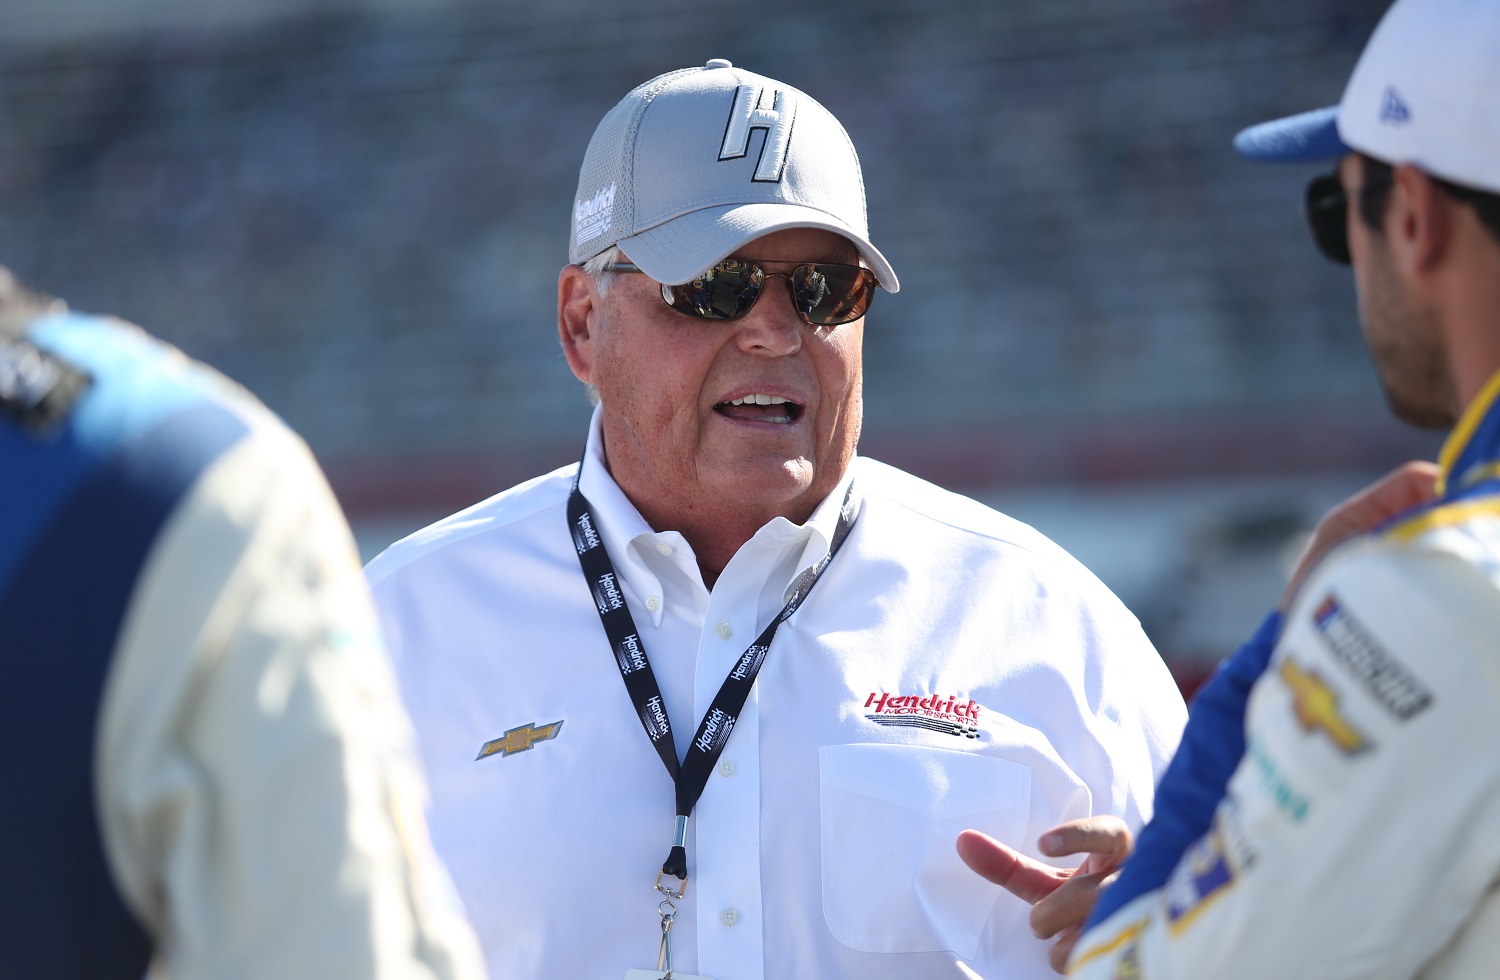 Rick Hendrick talks with team members before the Coca-Cola 600 on May 30, 2021, at Charlotte Motor Speedway. | David Rosenblum/Icon Sportswire via Getty Images